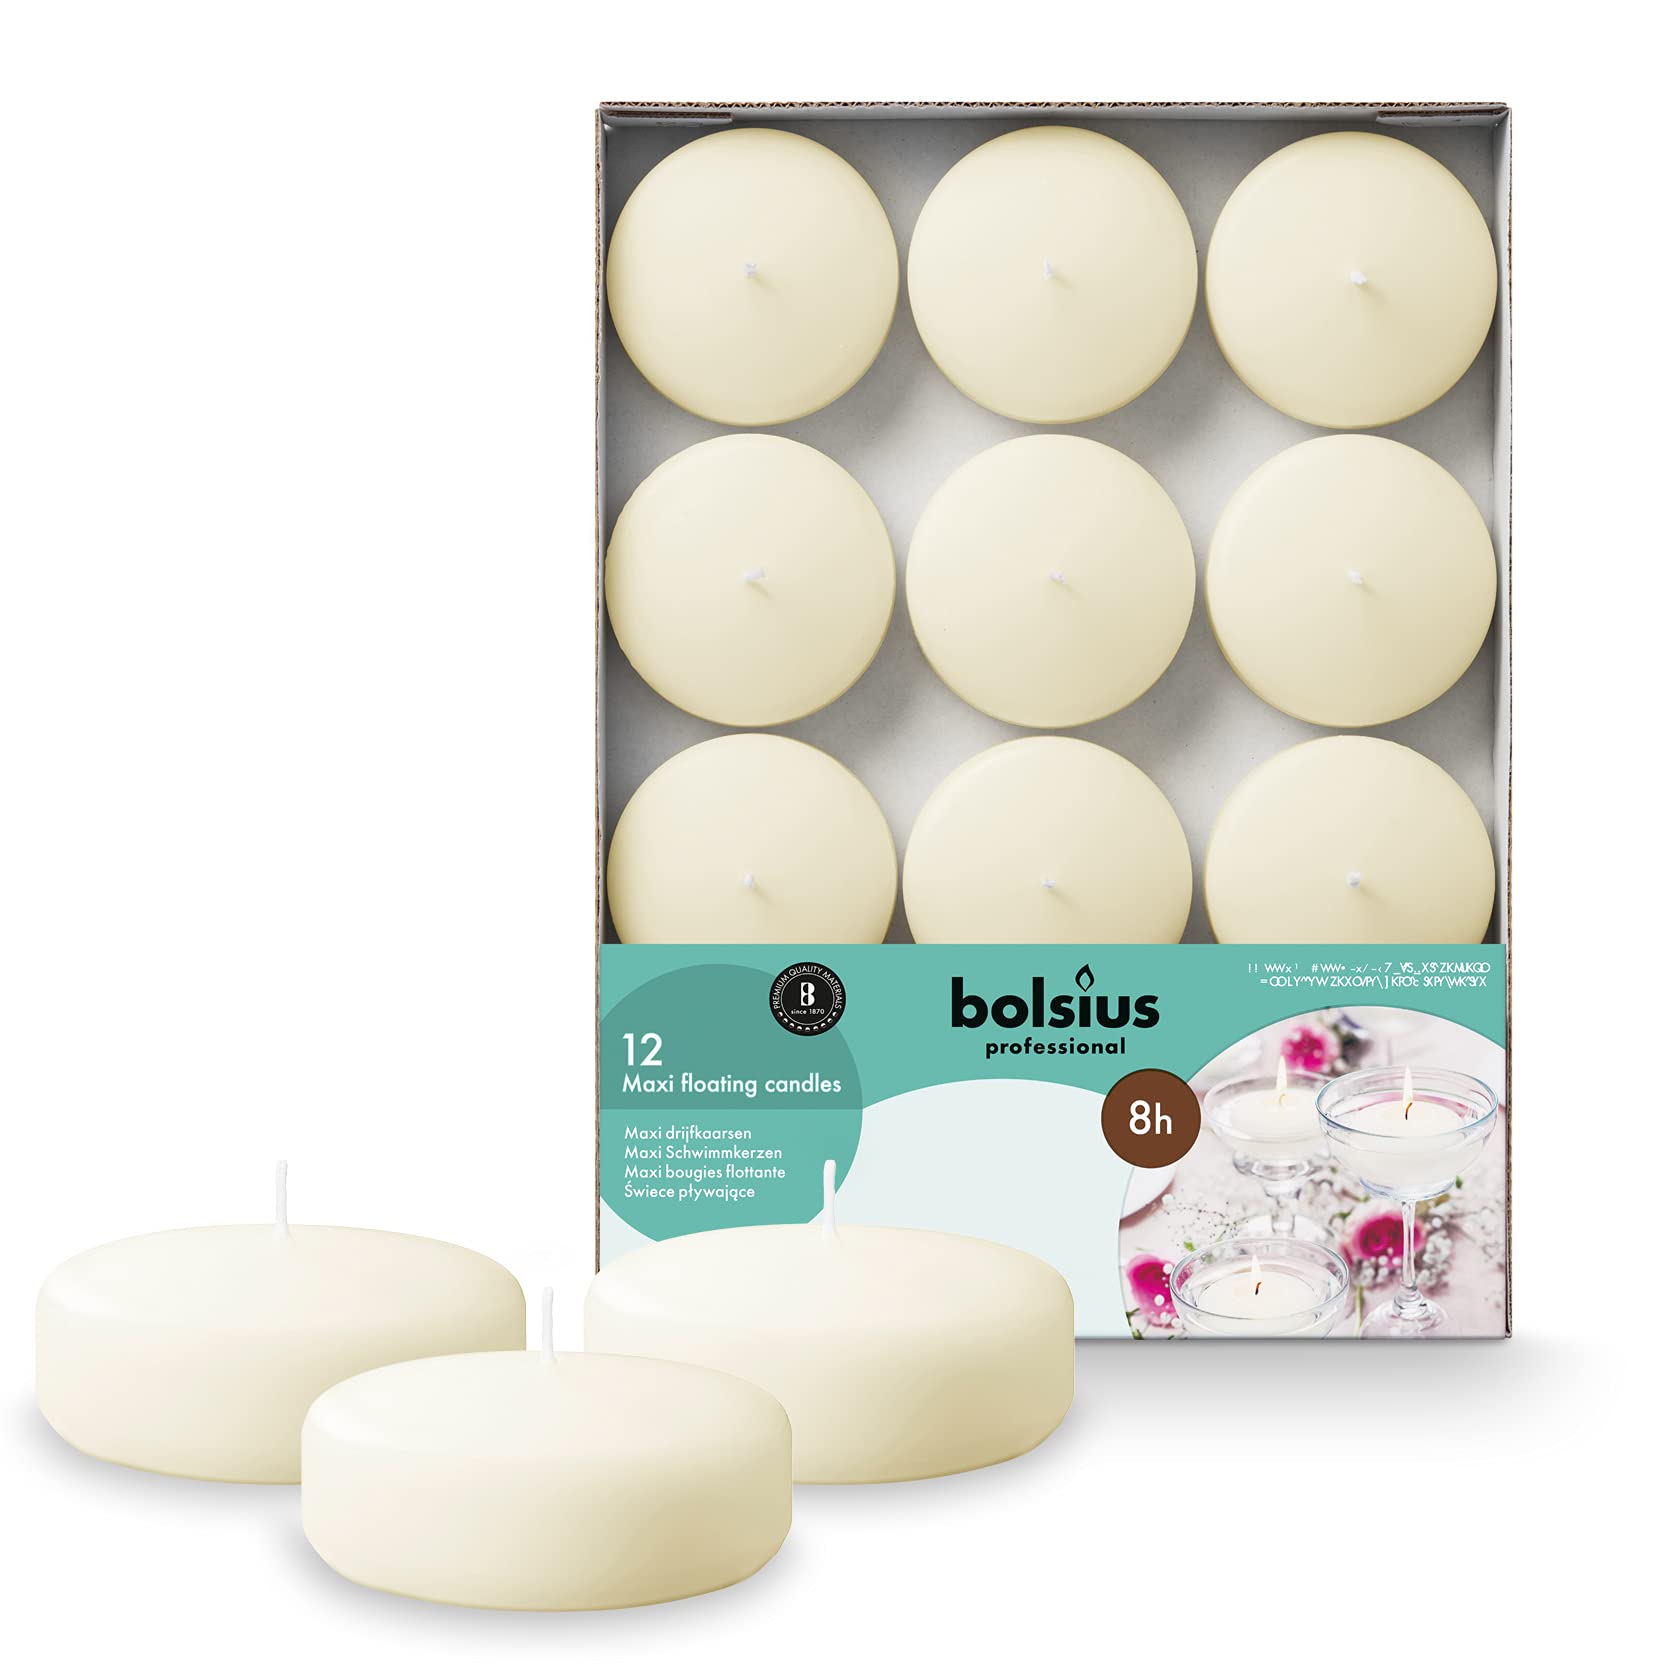 BOLSIUS Unscented Floating Candles - Pure Rich Creamy 3" Ivory, European Quality  - Like New